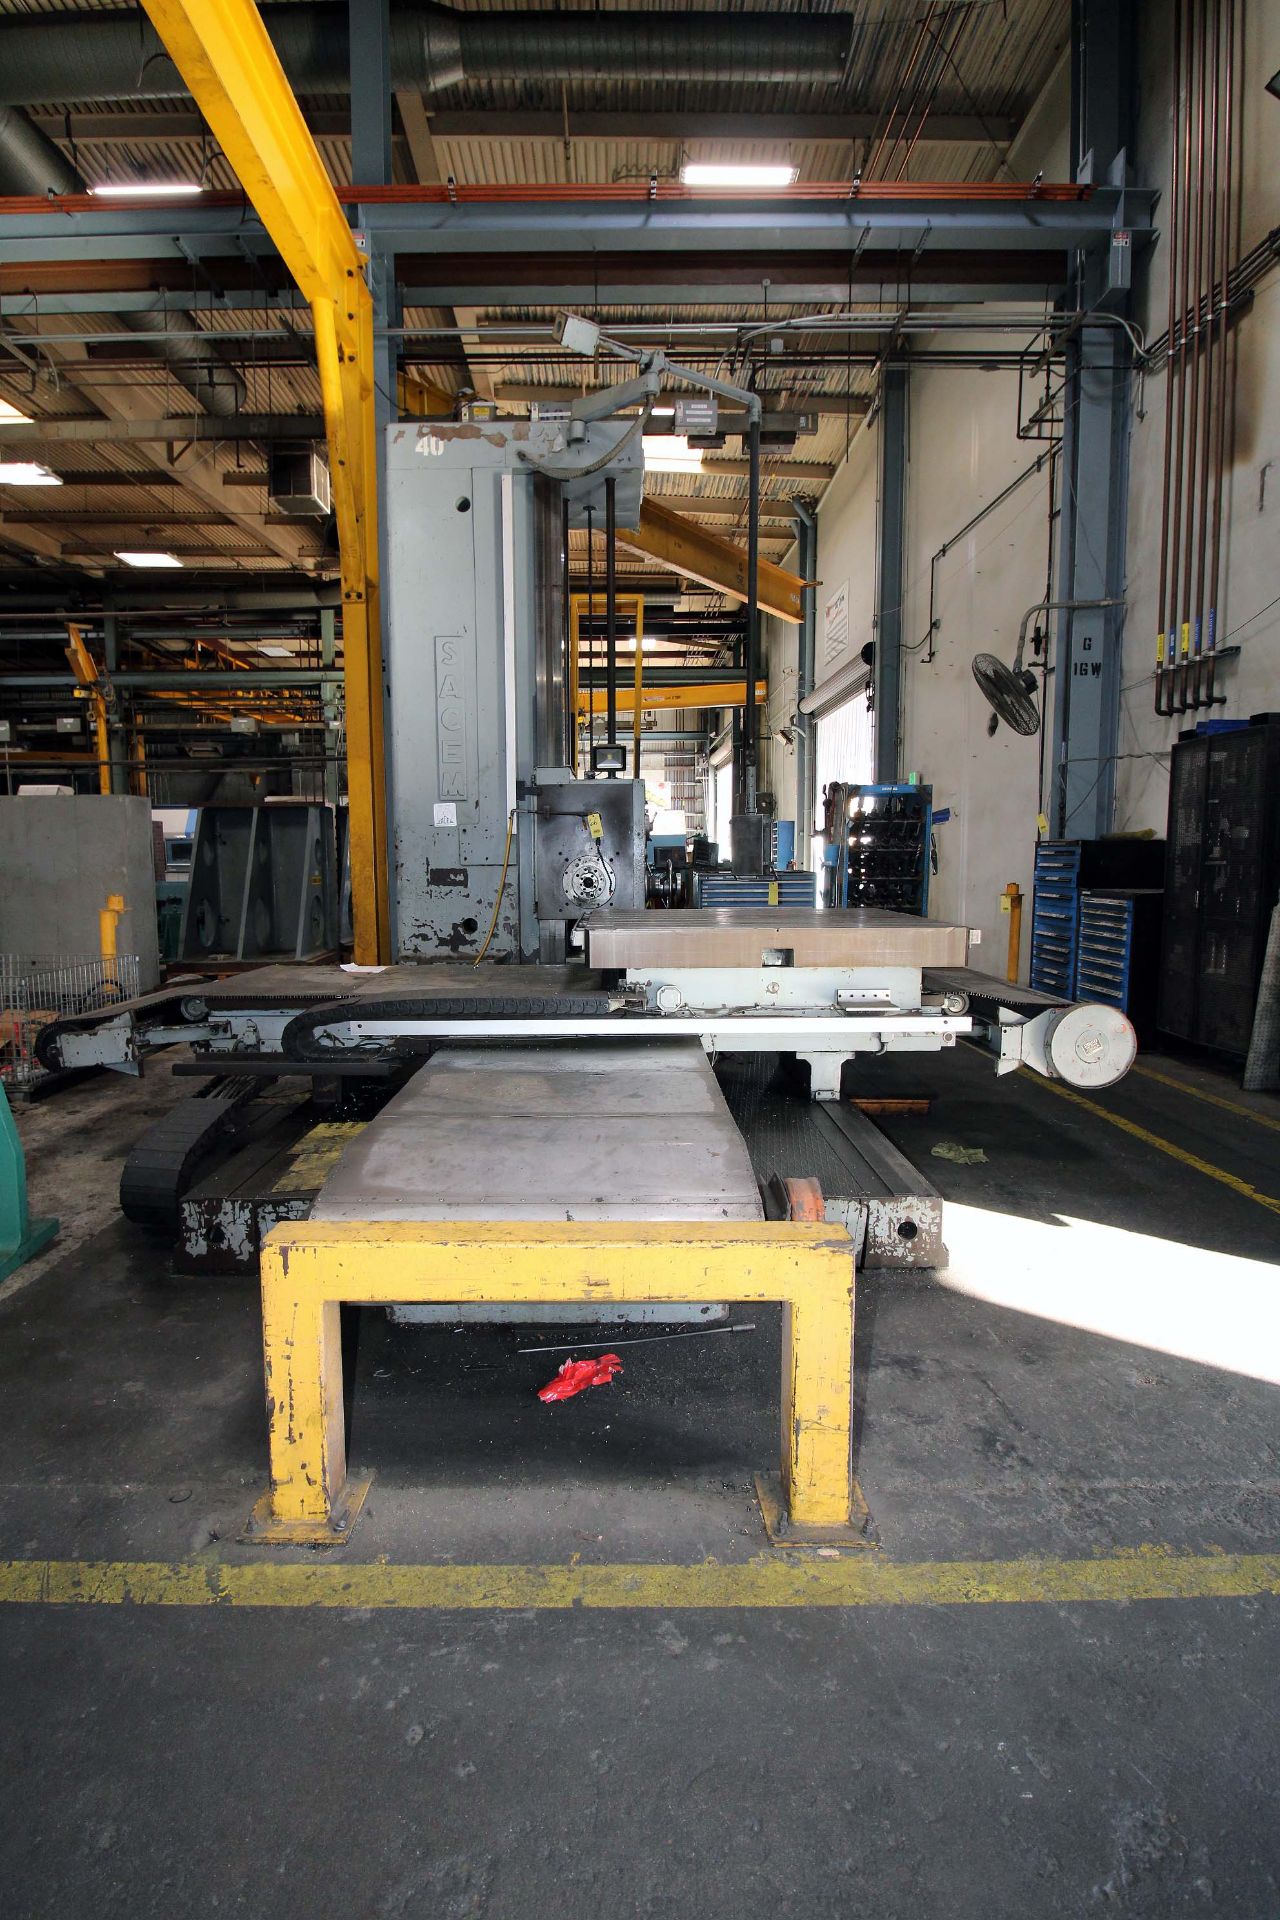 TABLE TYPE HORIZONTAL BORING MILL, SACEM HERCULES MDL. MST130, new 1980, 55” x 63-3/4” built-in